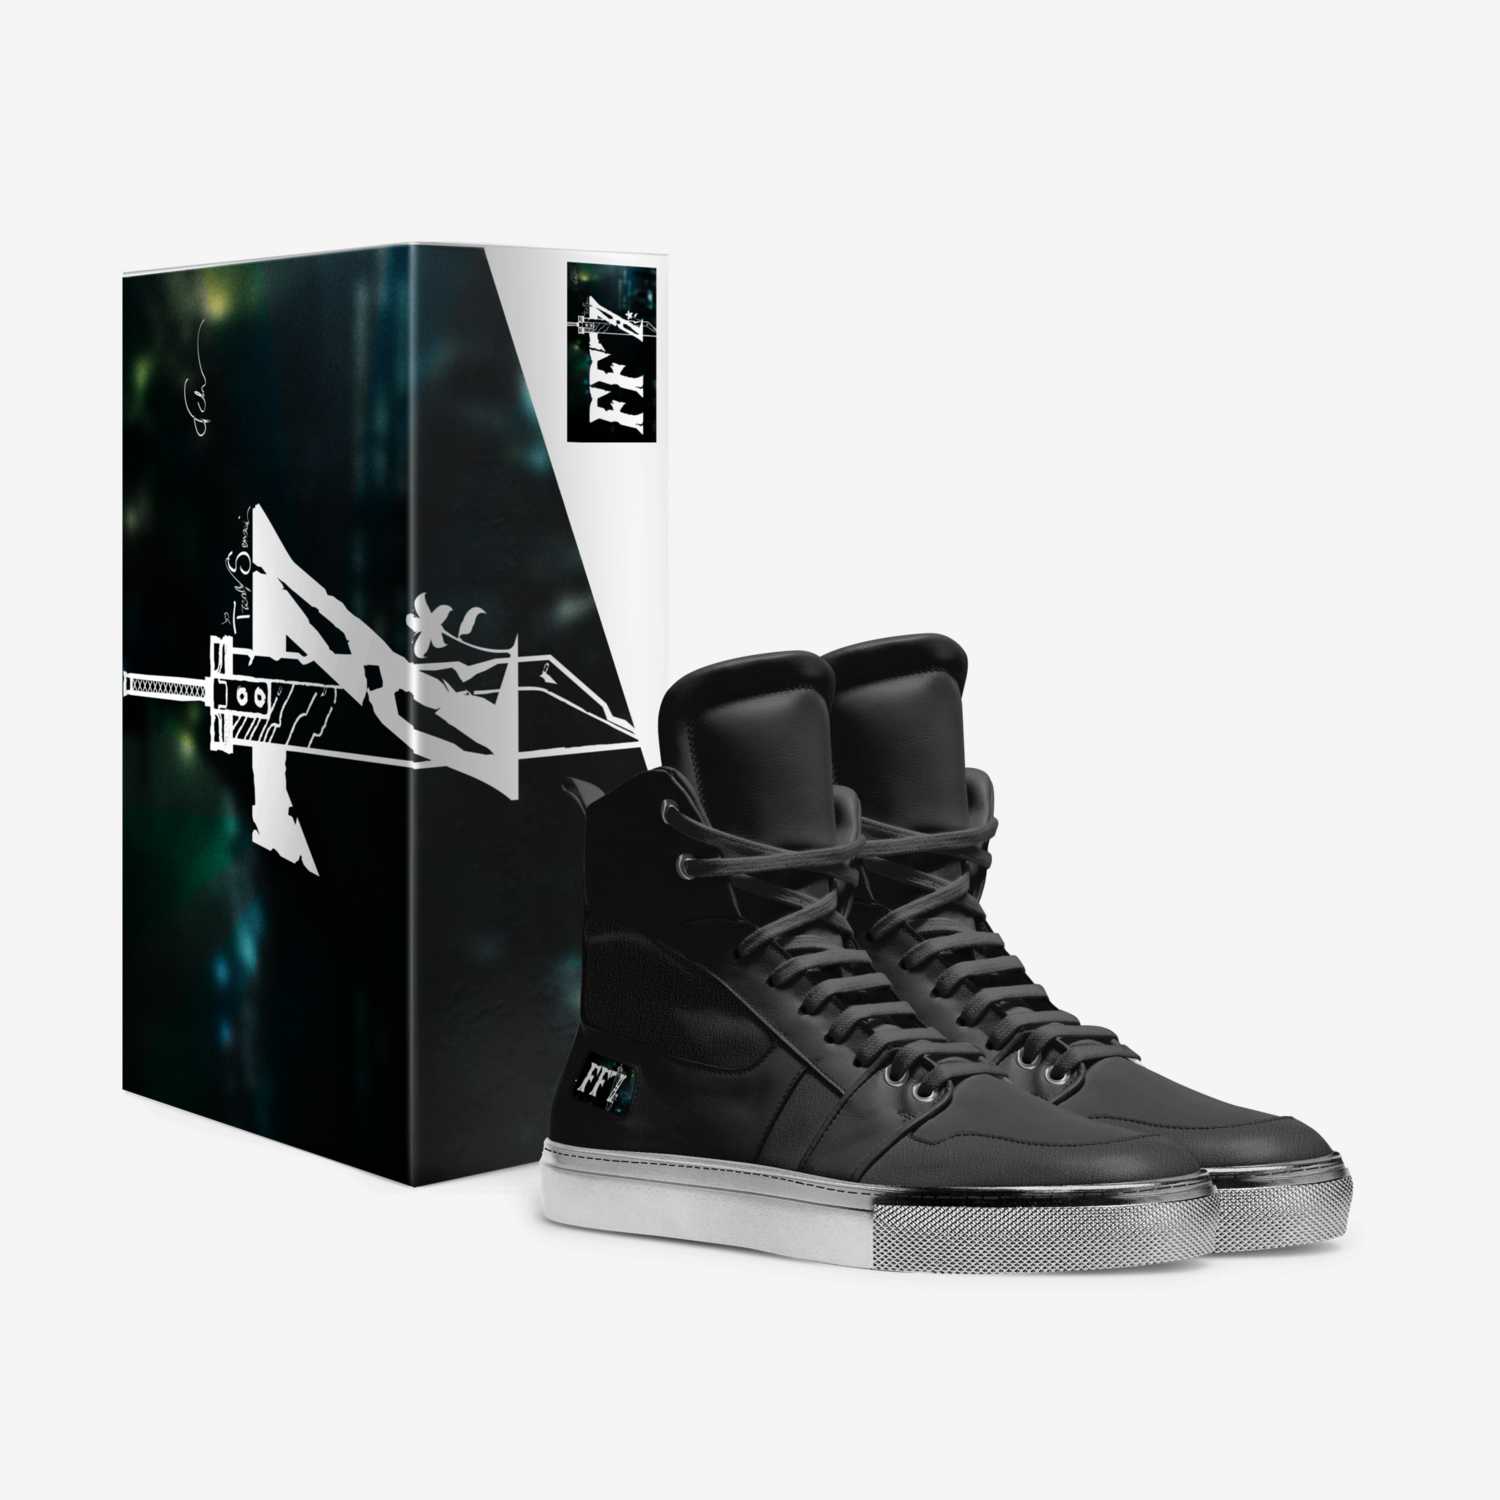 Final Fantasy custom made in Italy shoes by Shawn Mcnair | Box view